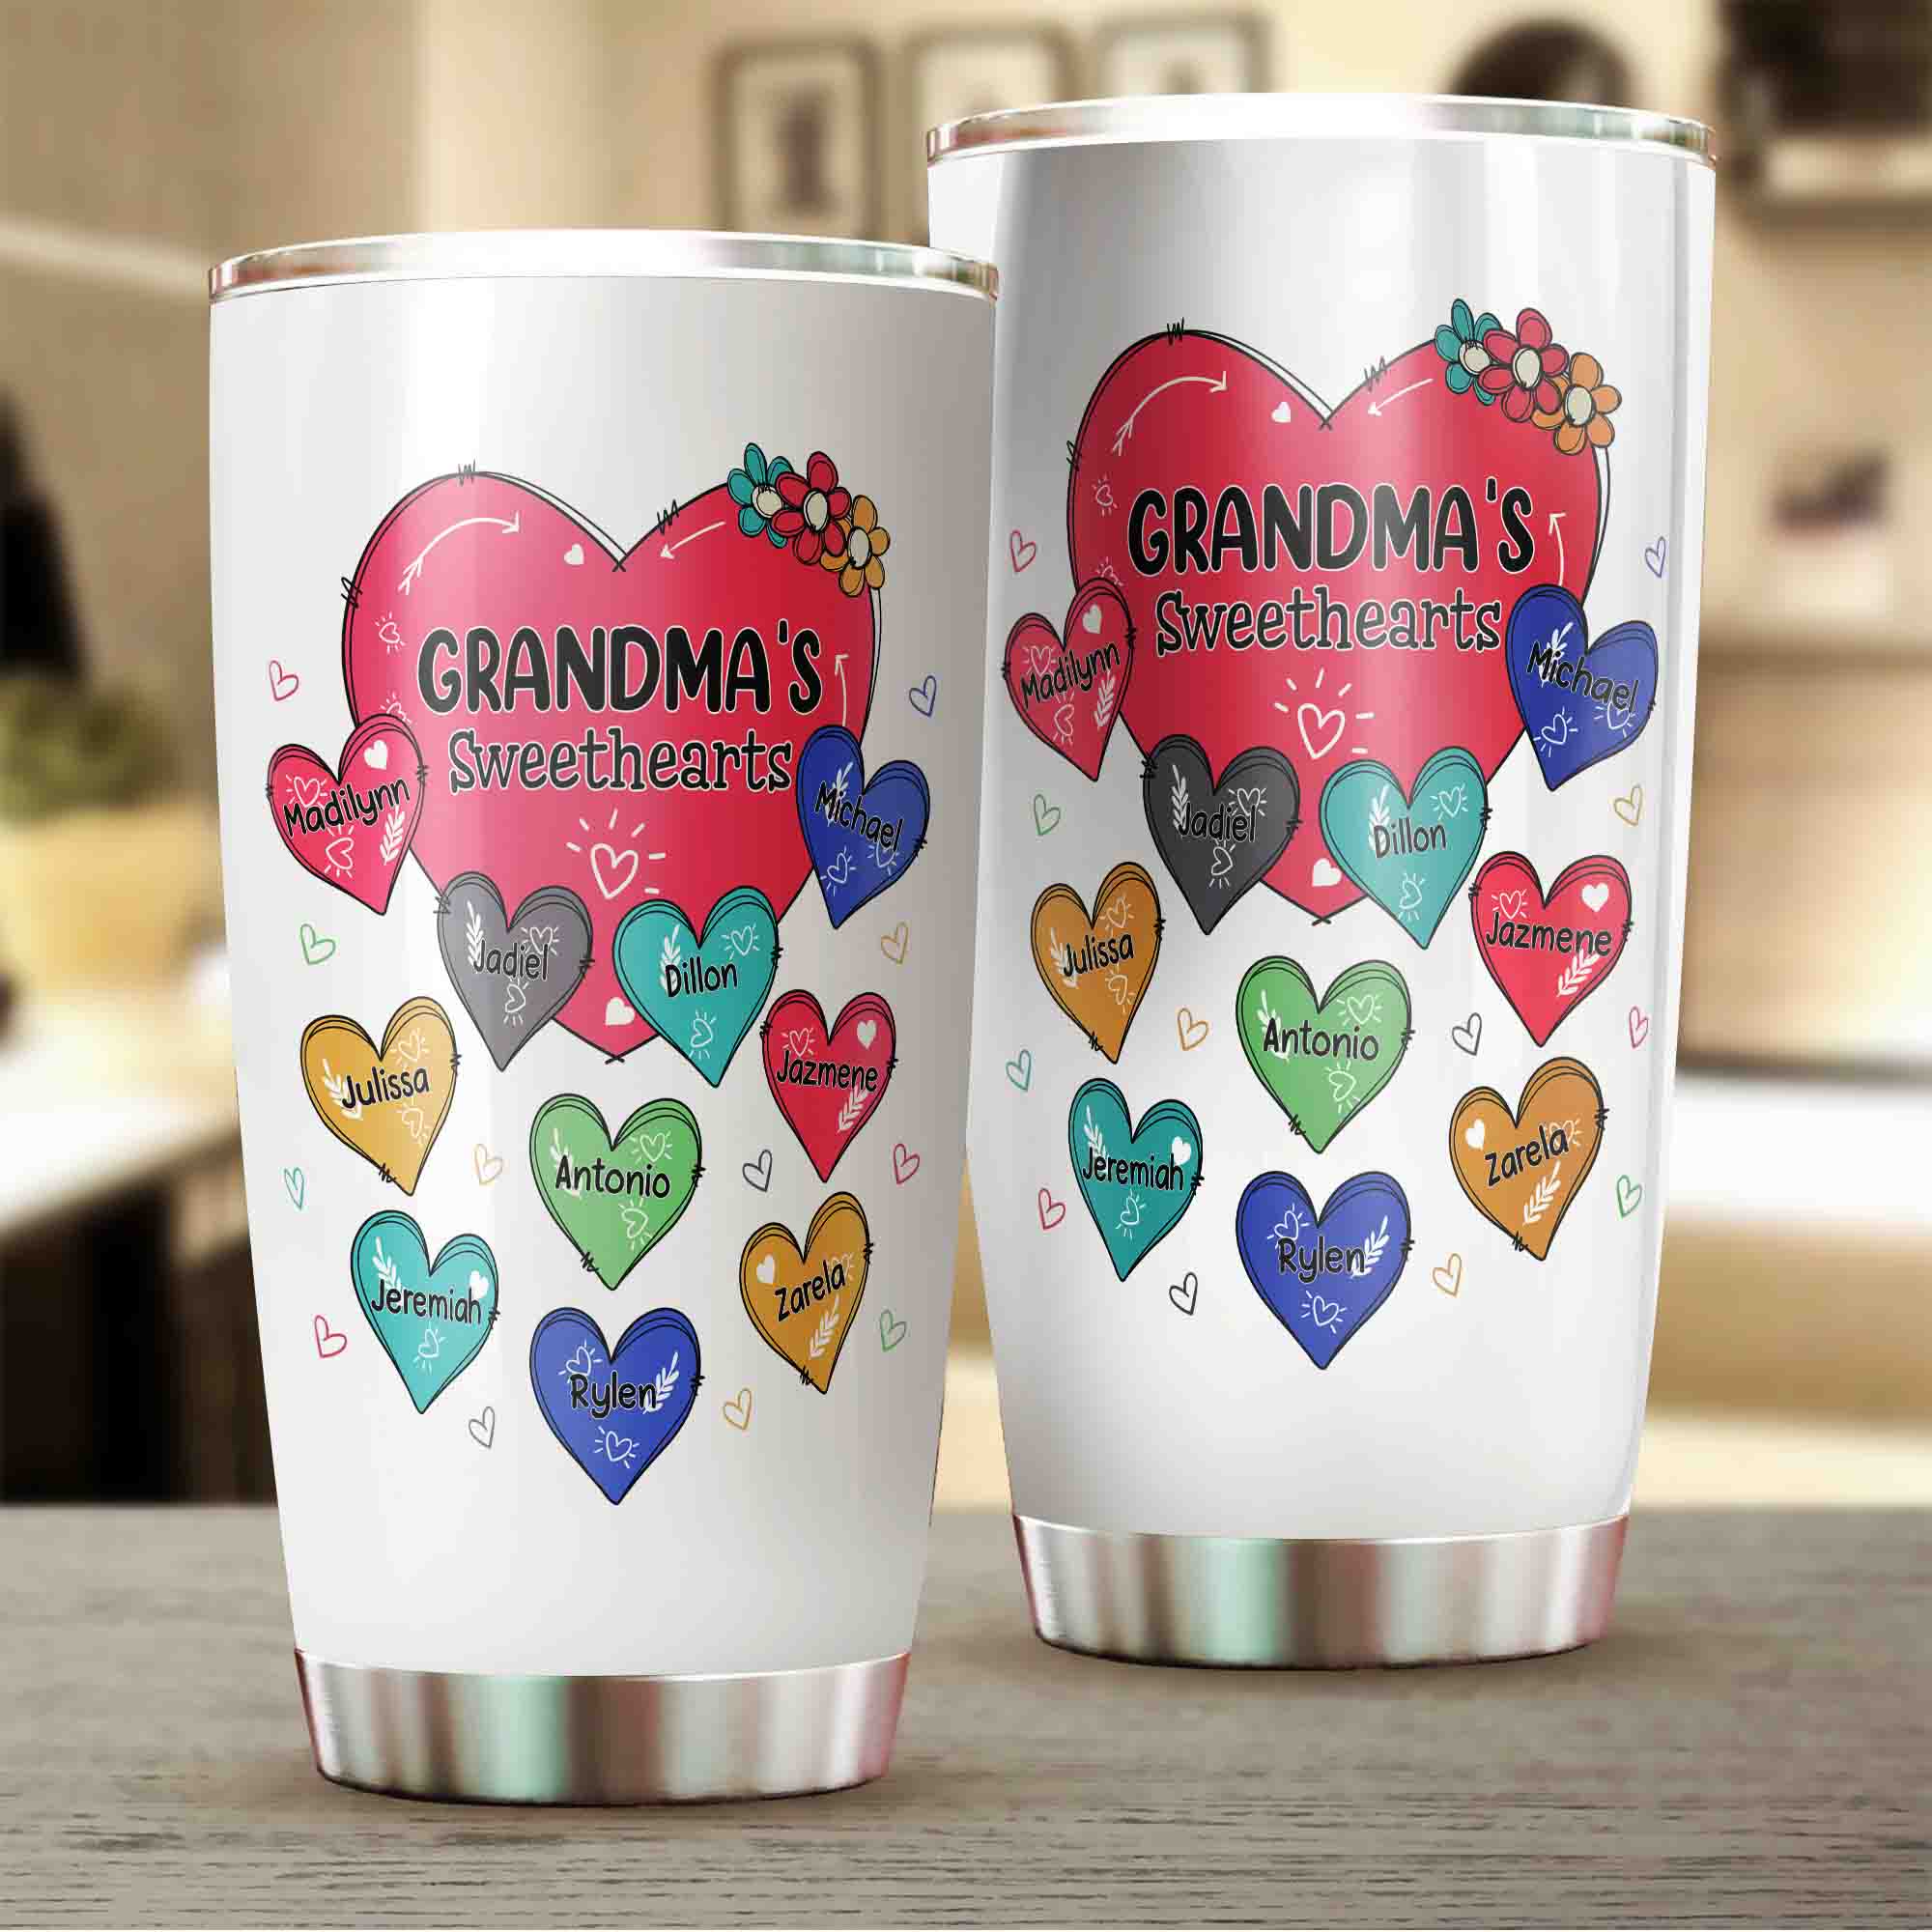 Personalized Grandma Tumbler With Year